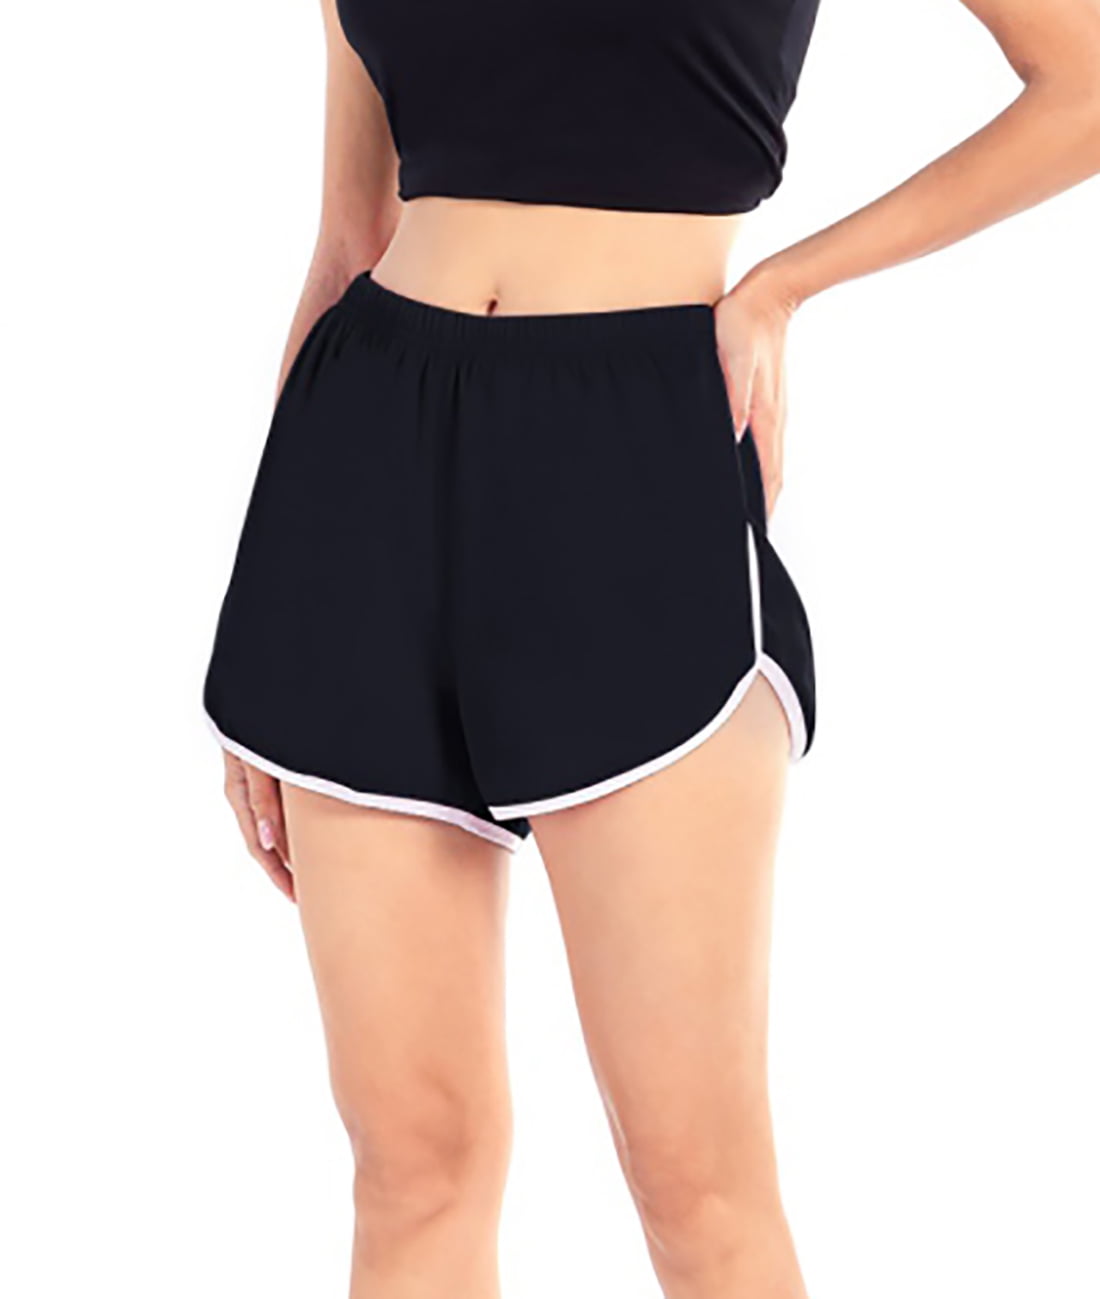 Women Petite's Workout Shorts Yoga Dance Short Pants Sport Shorts Summer  Athletic Cycling Hiking Sports Comfy Shorts Summer Exercise Bottoms,S-4XL 